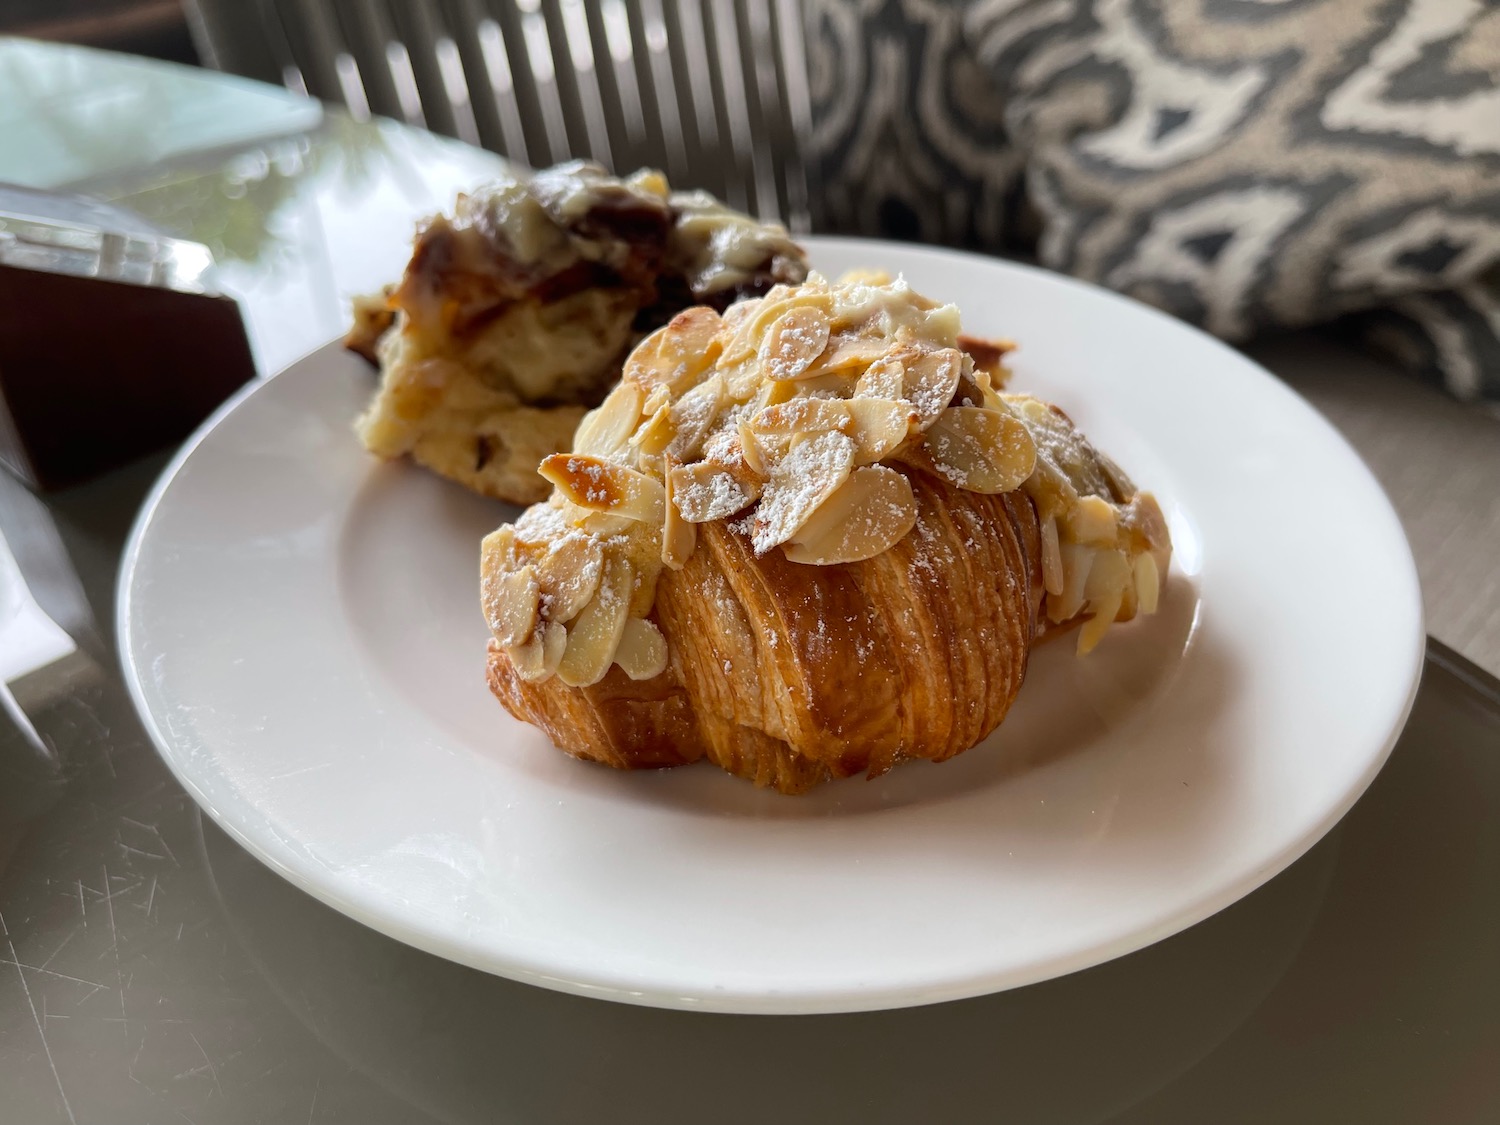 a plate of pastries with almonds on top